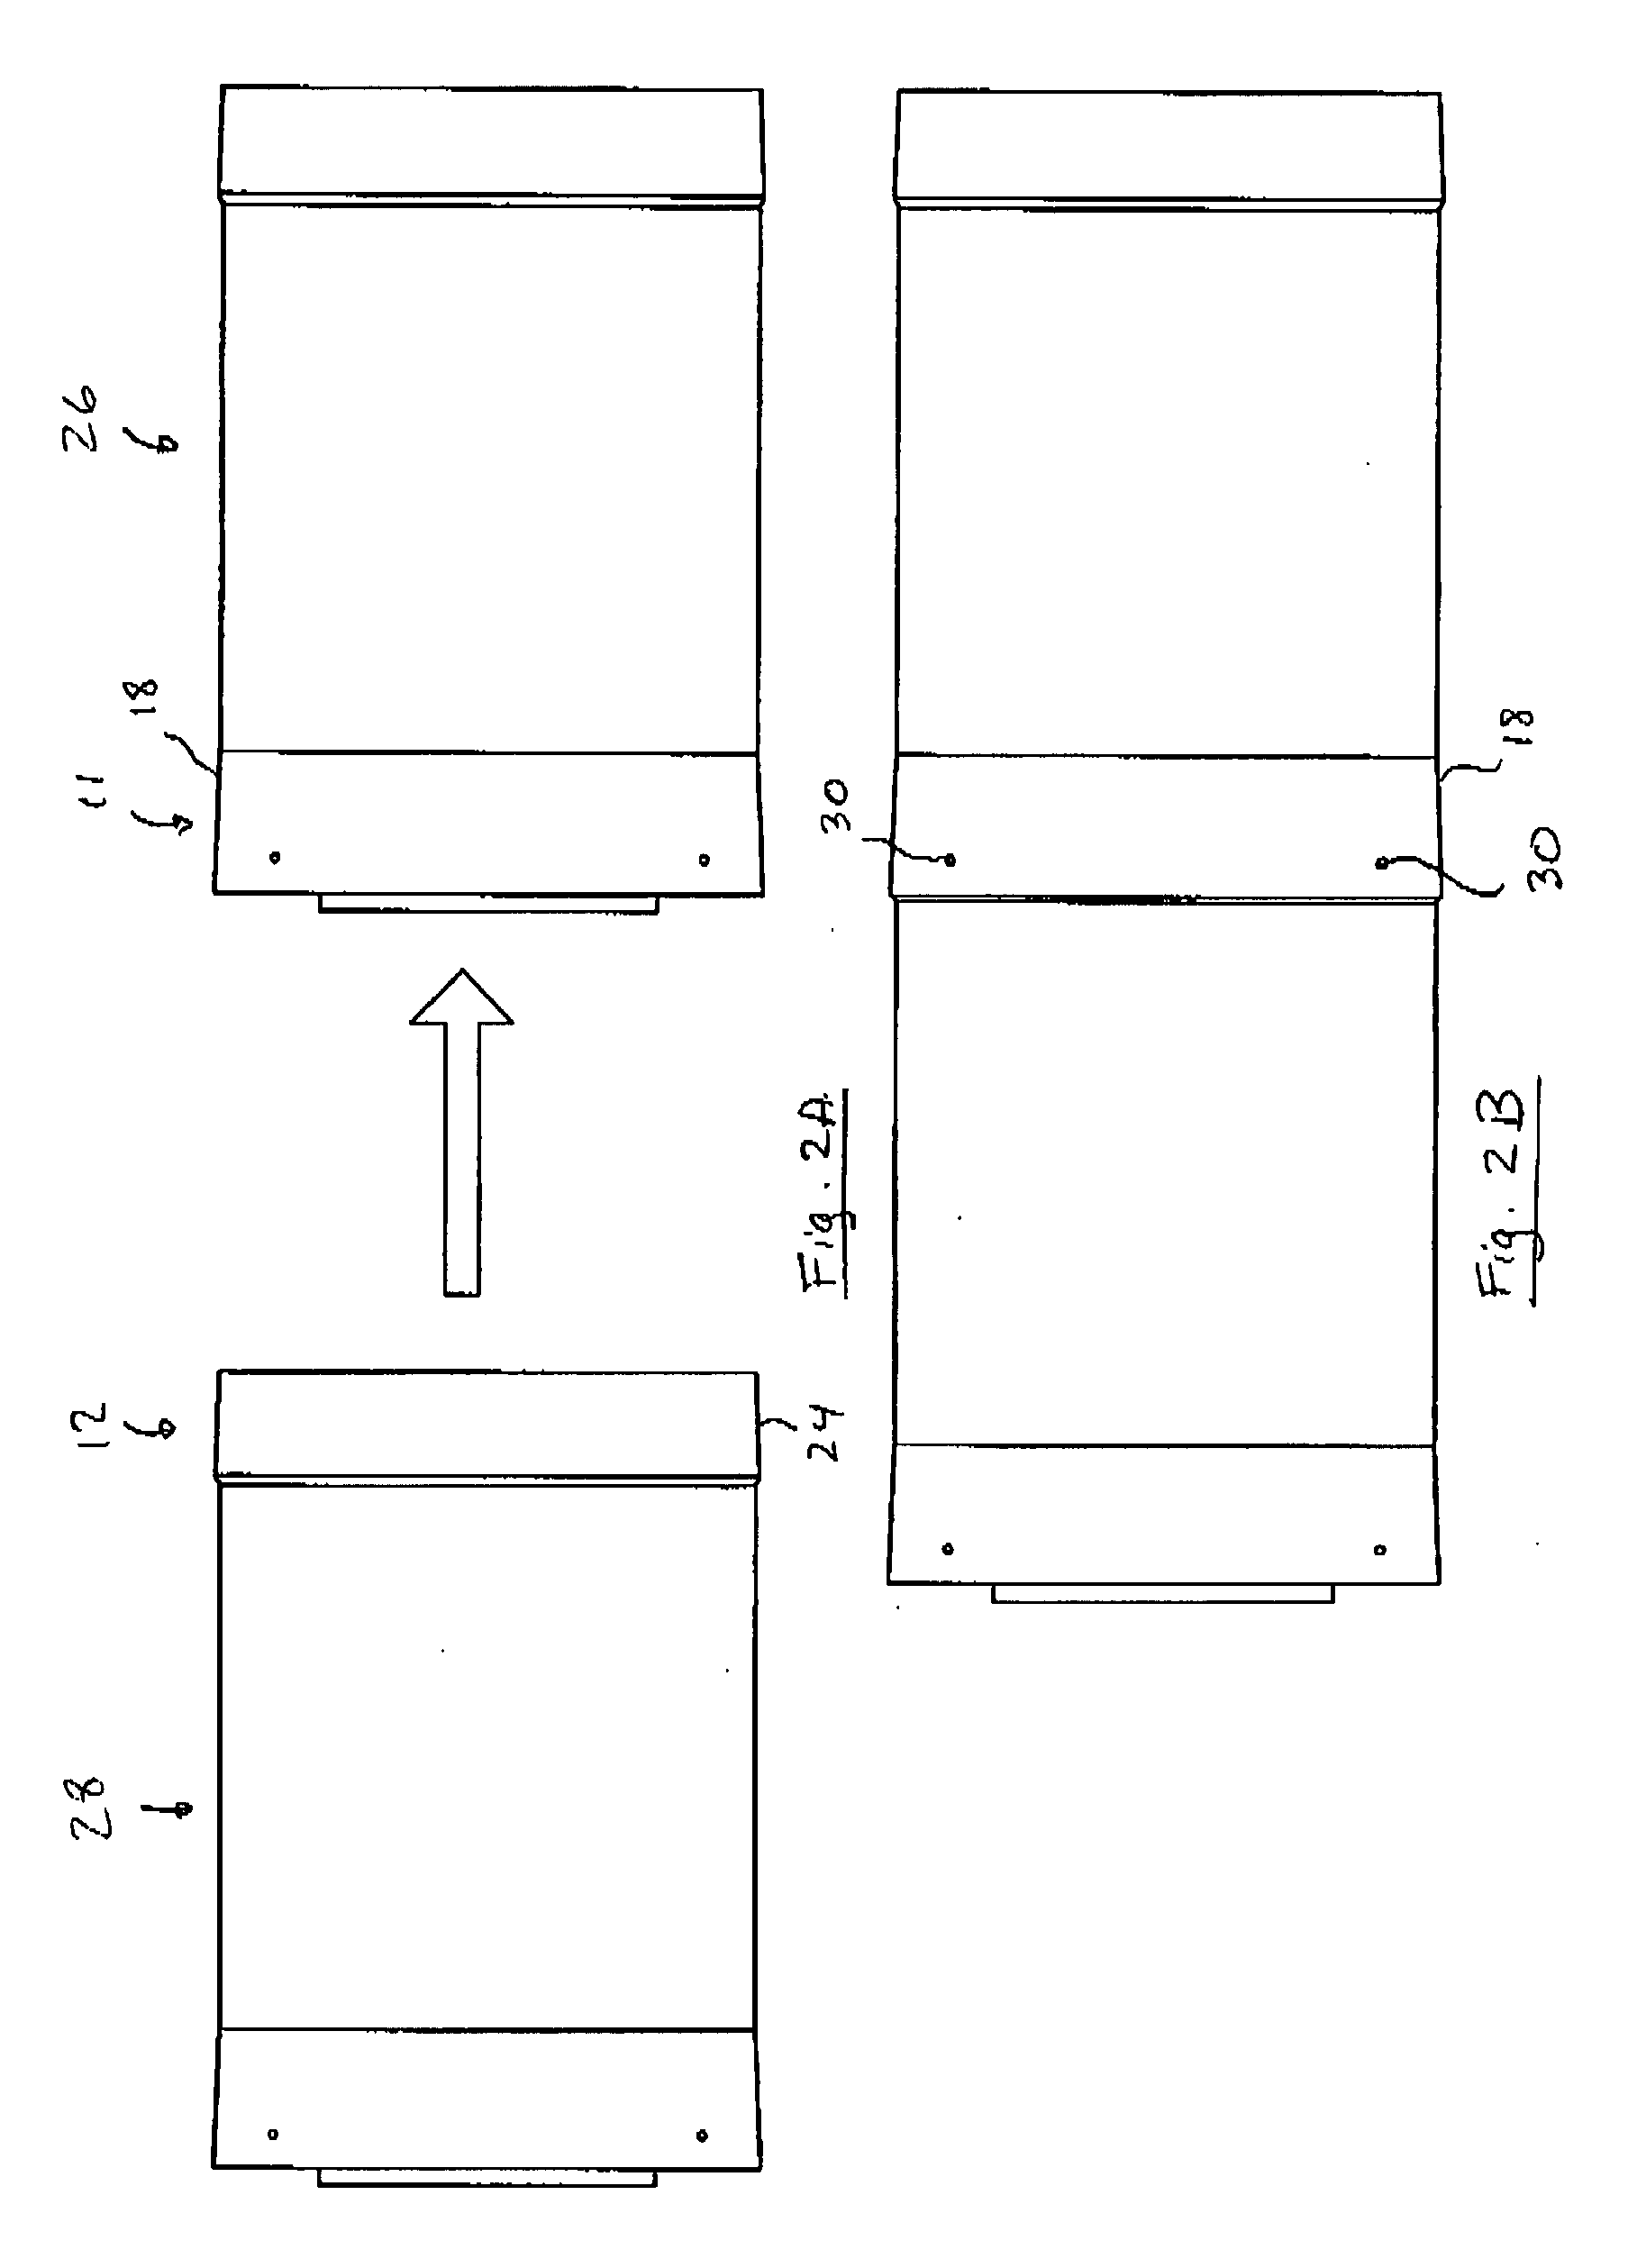 Coupling for direct venting system